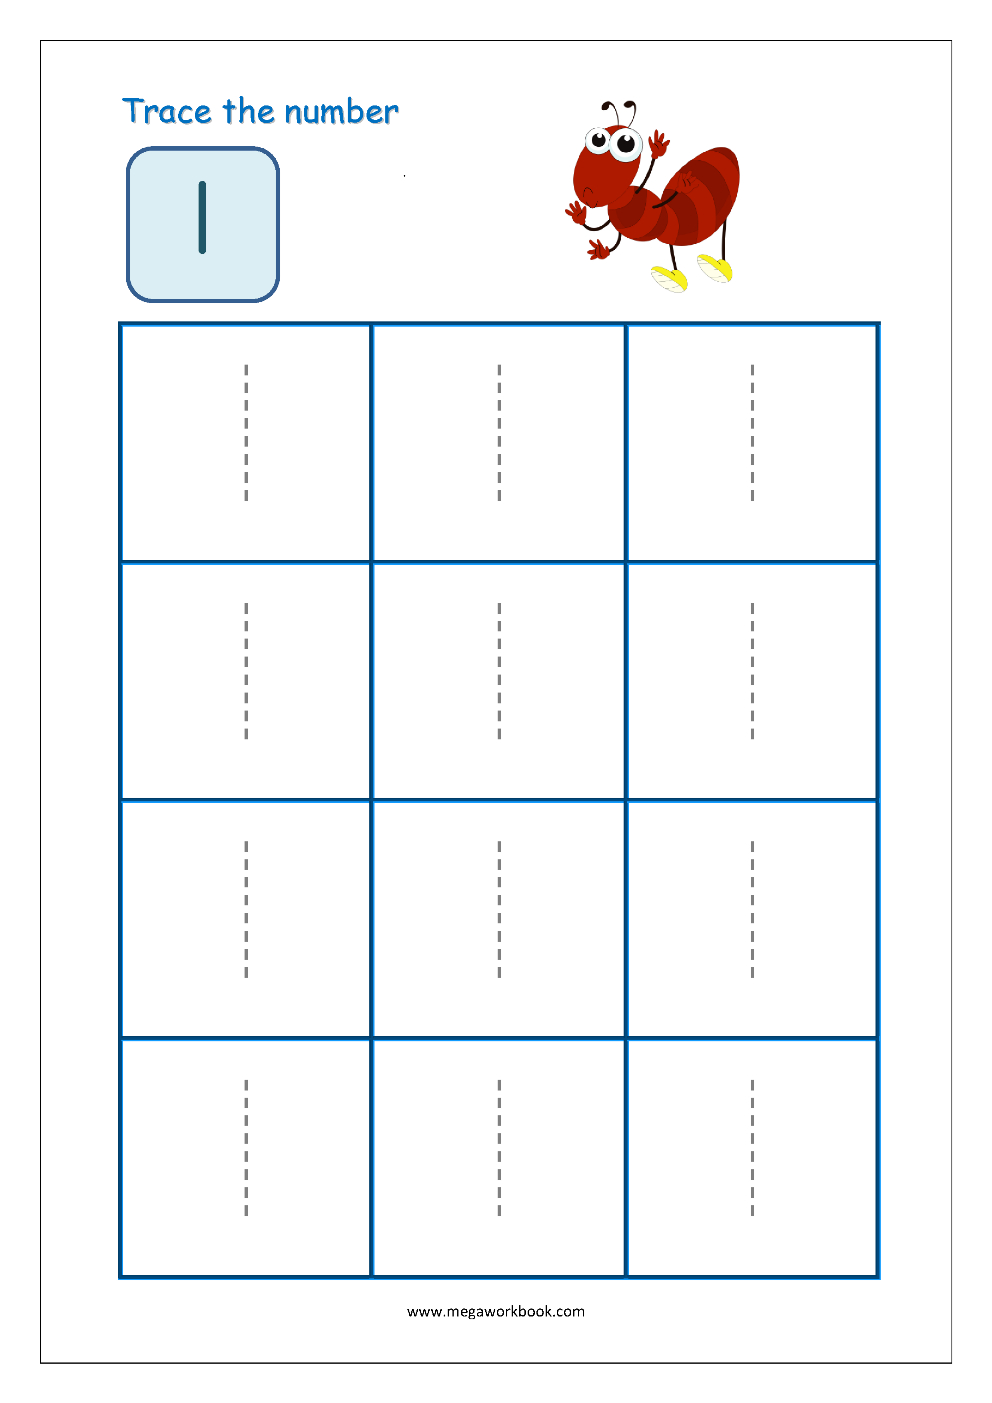 Number Tracing - Tracing Numbers - Number Tracing Worksheets throughout Letter 2 Tracing